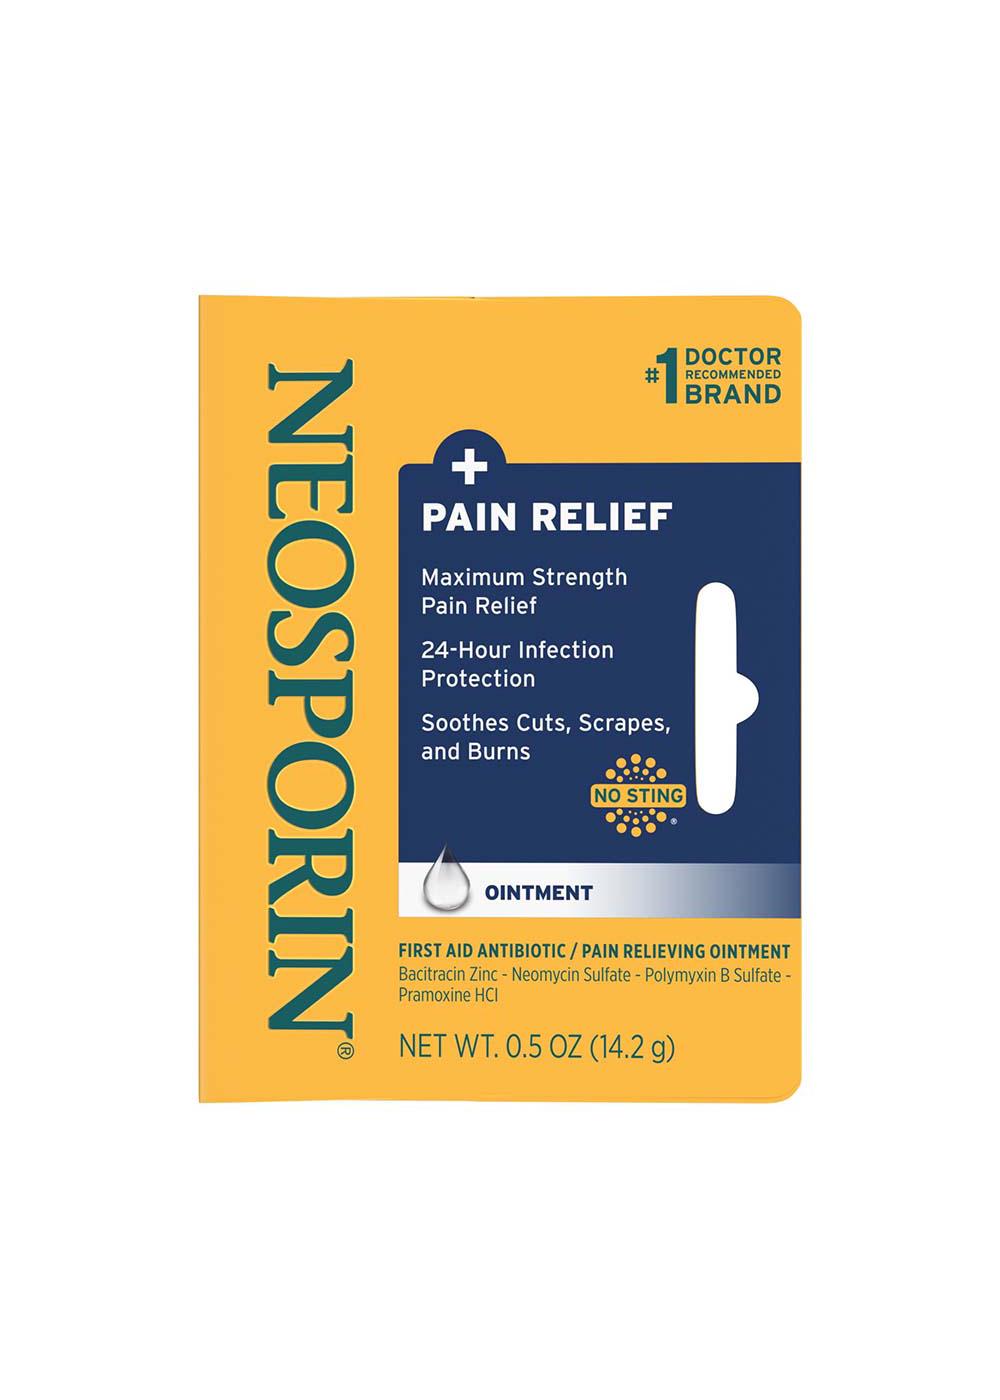 Neosporin + Pain Relief Ointment; image 1 of 7